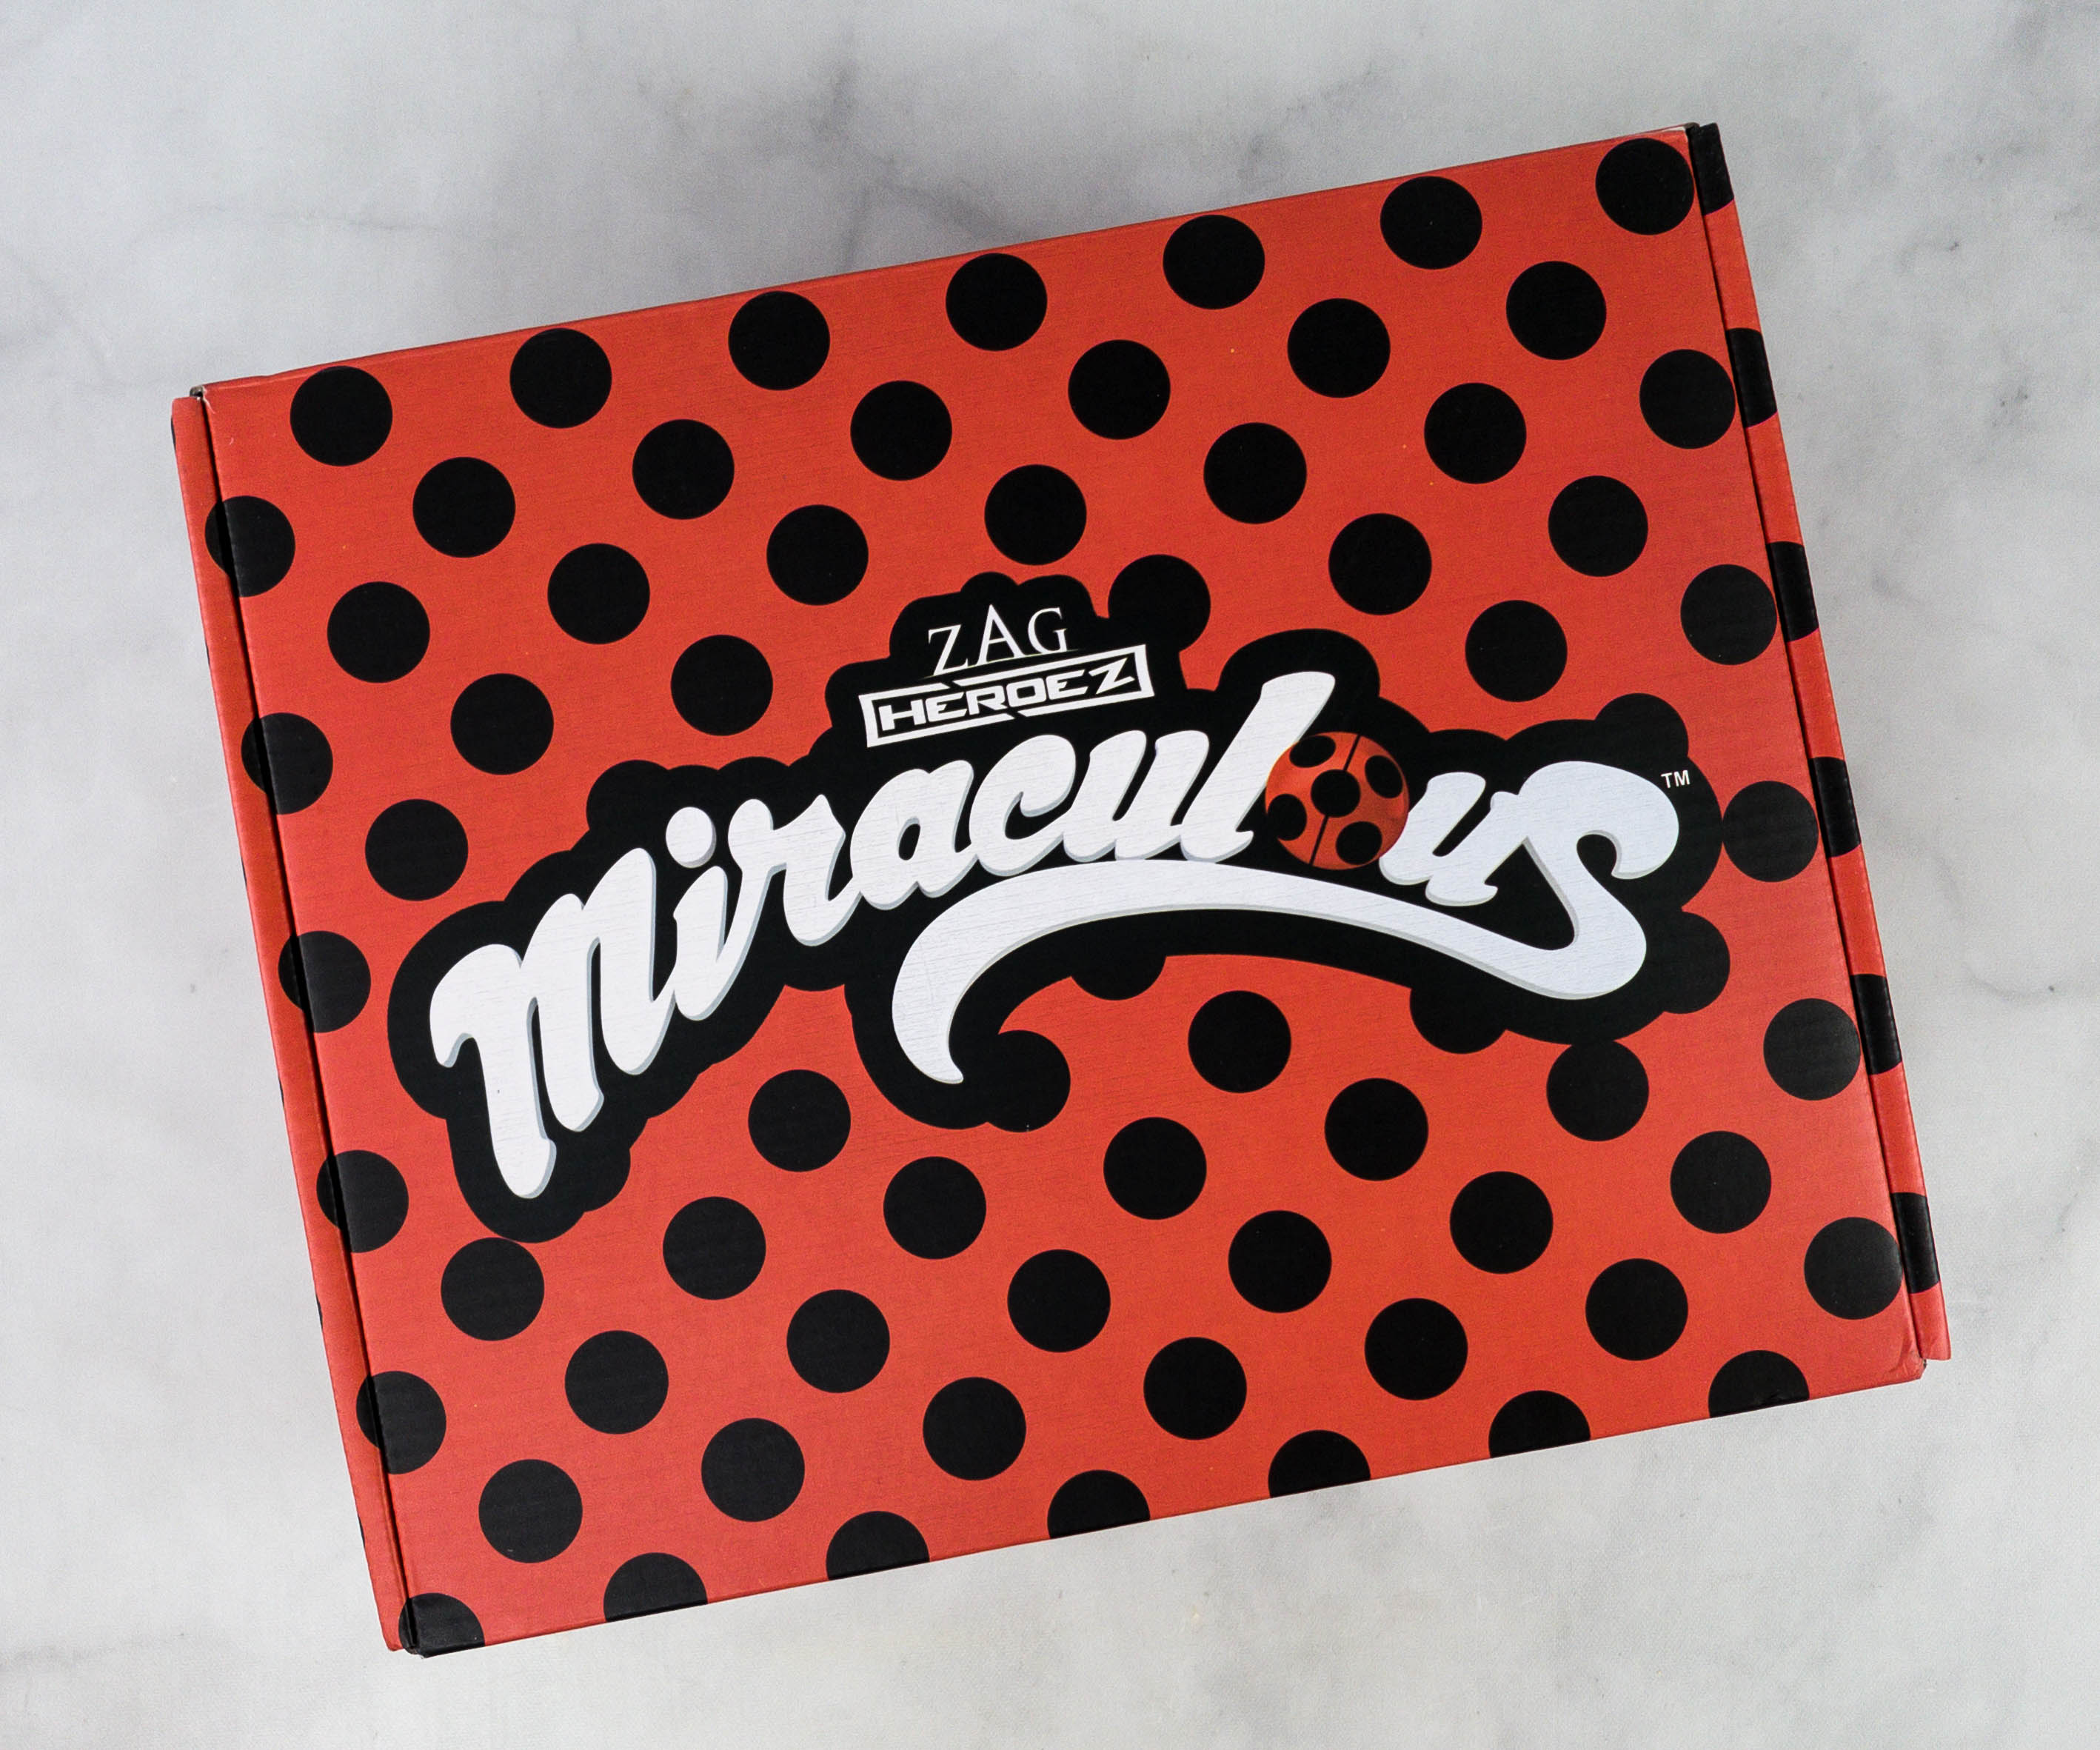 Miraculous Box Review - Winter 2020